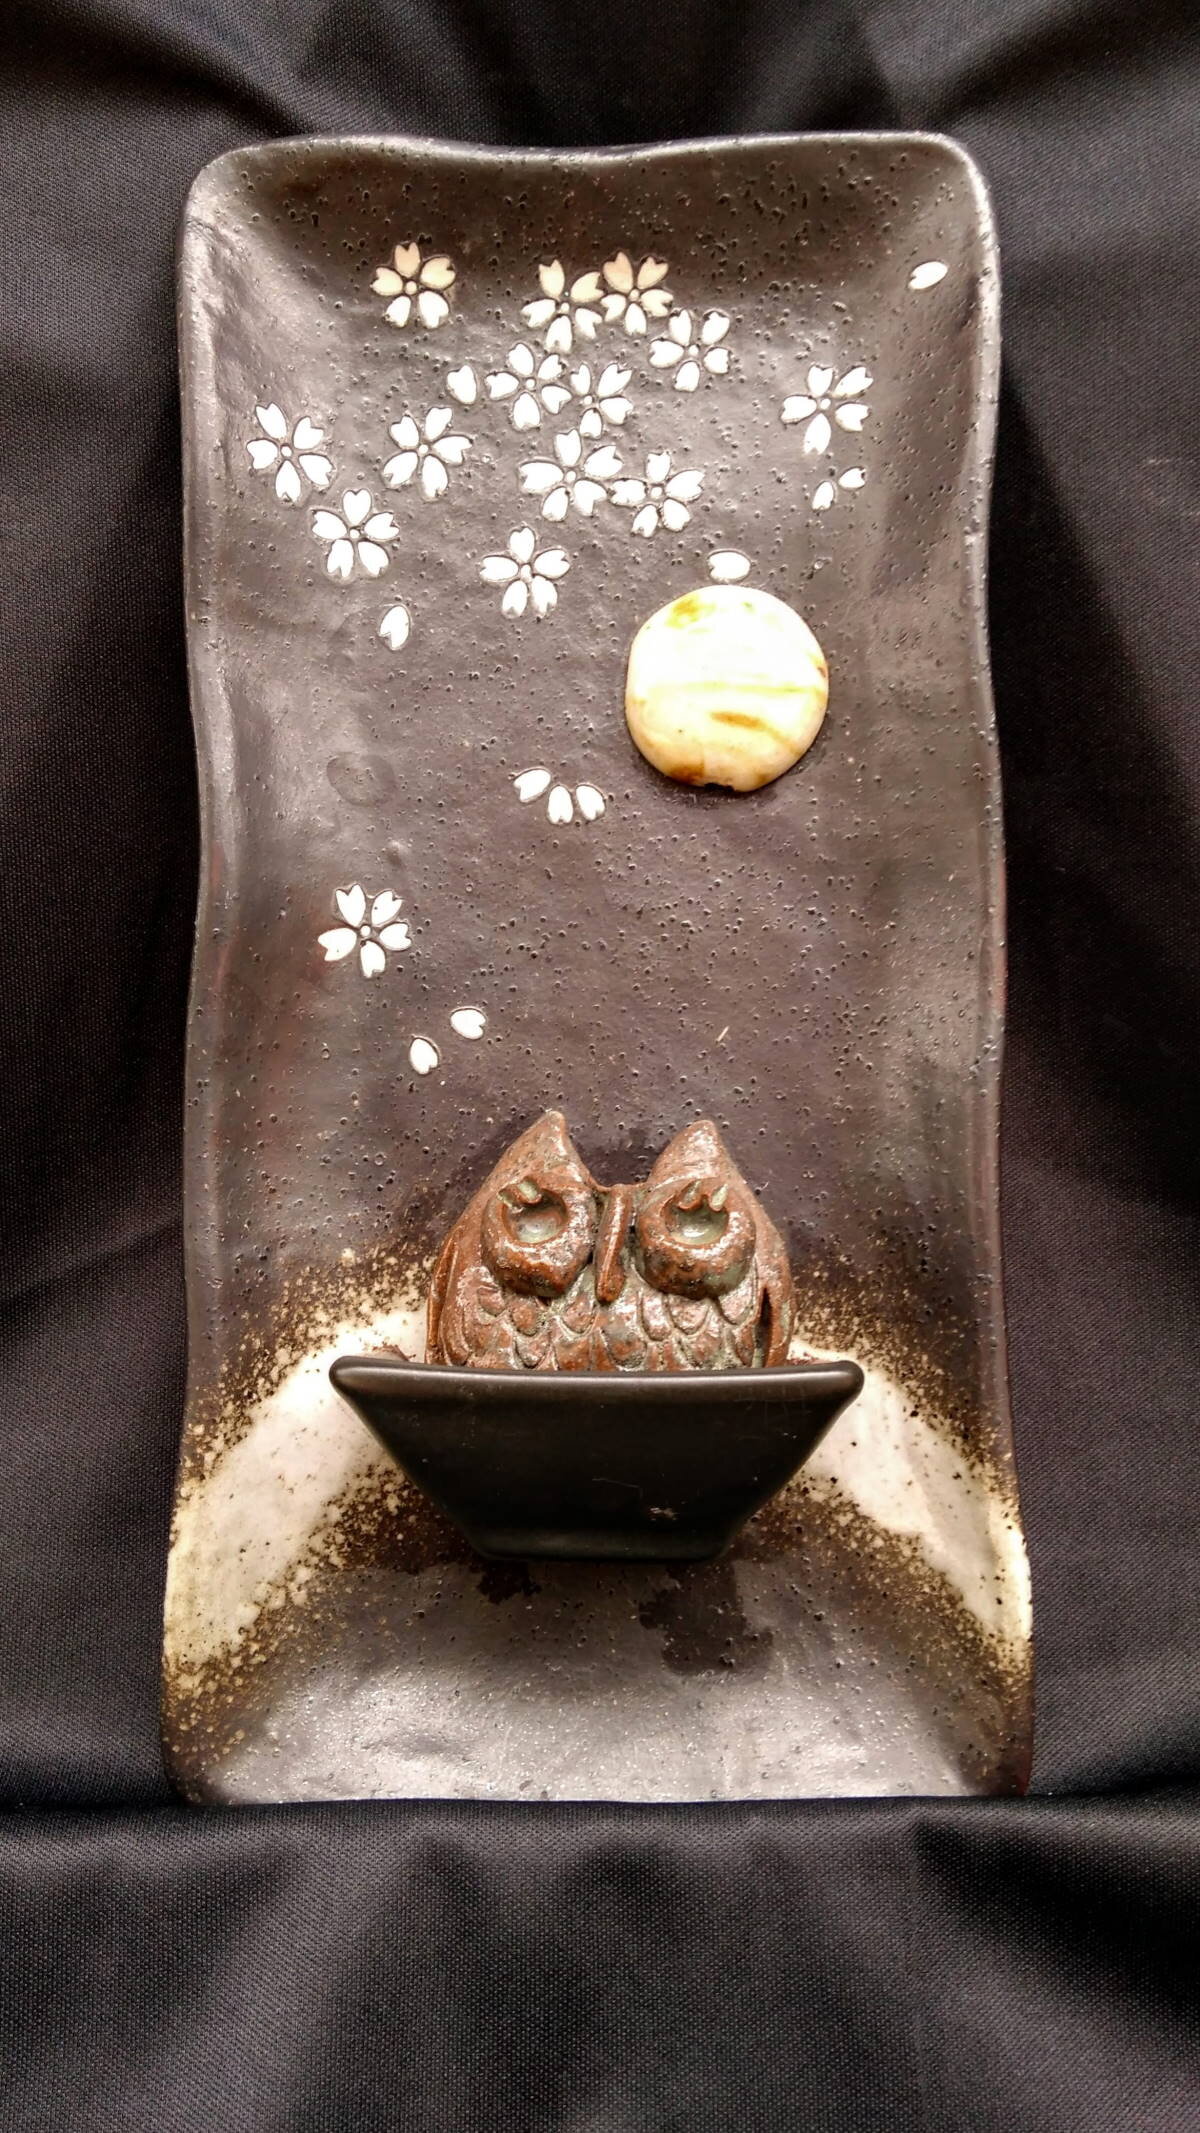 A Dish of Owl 